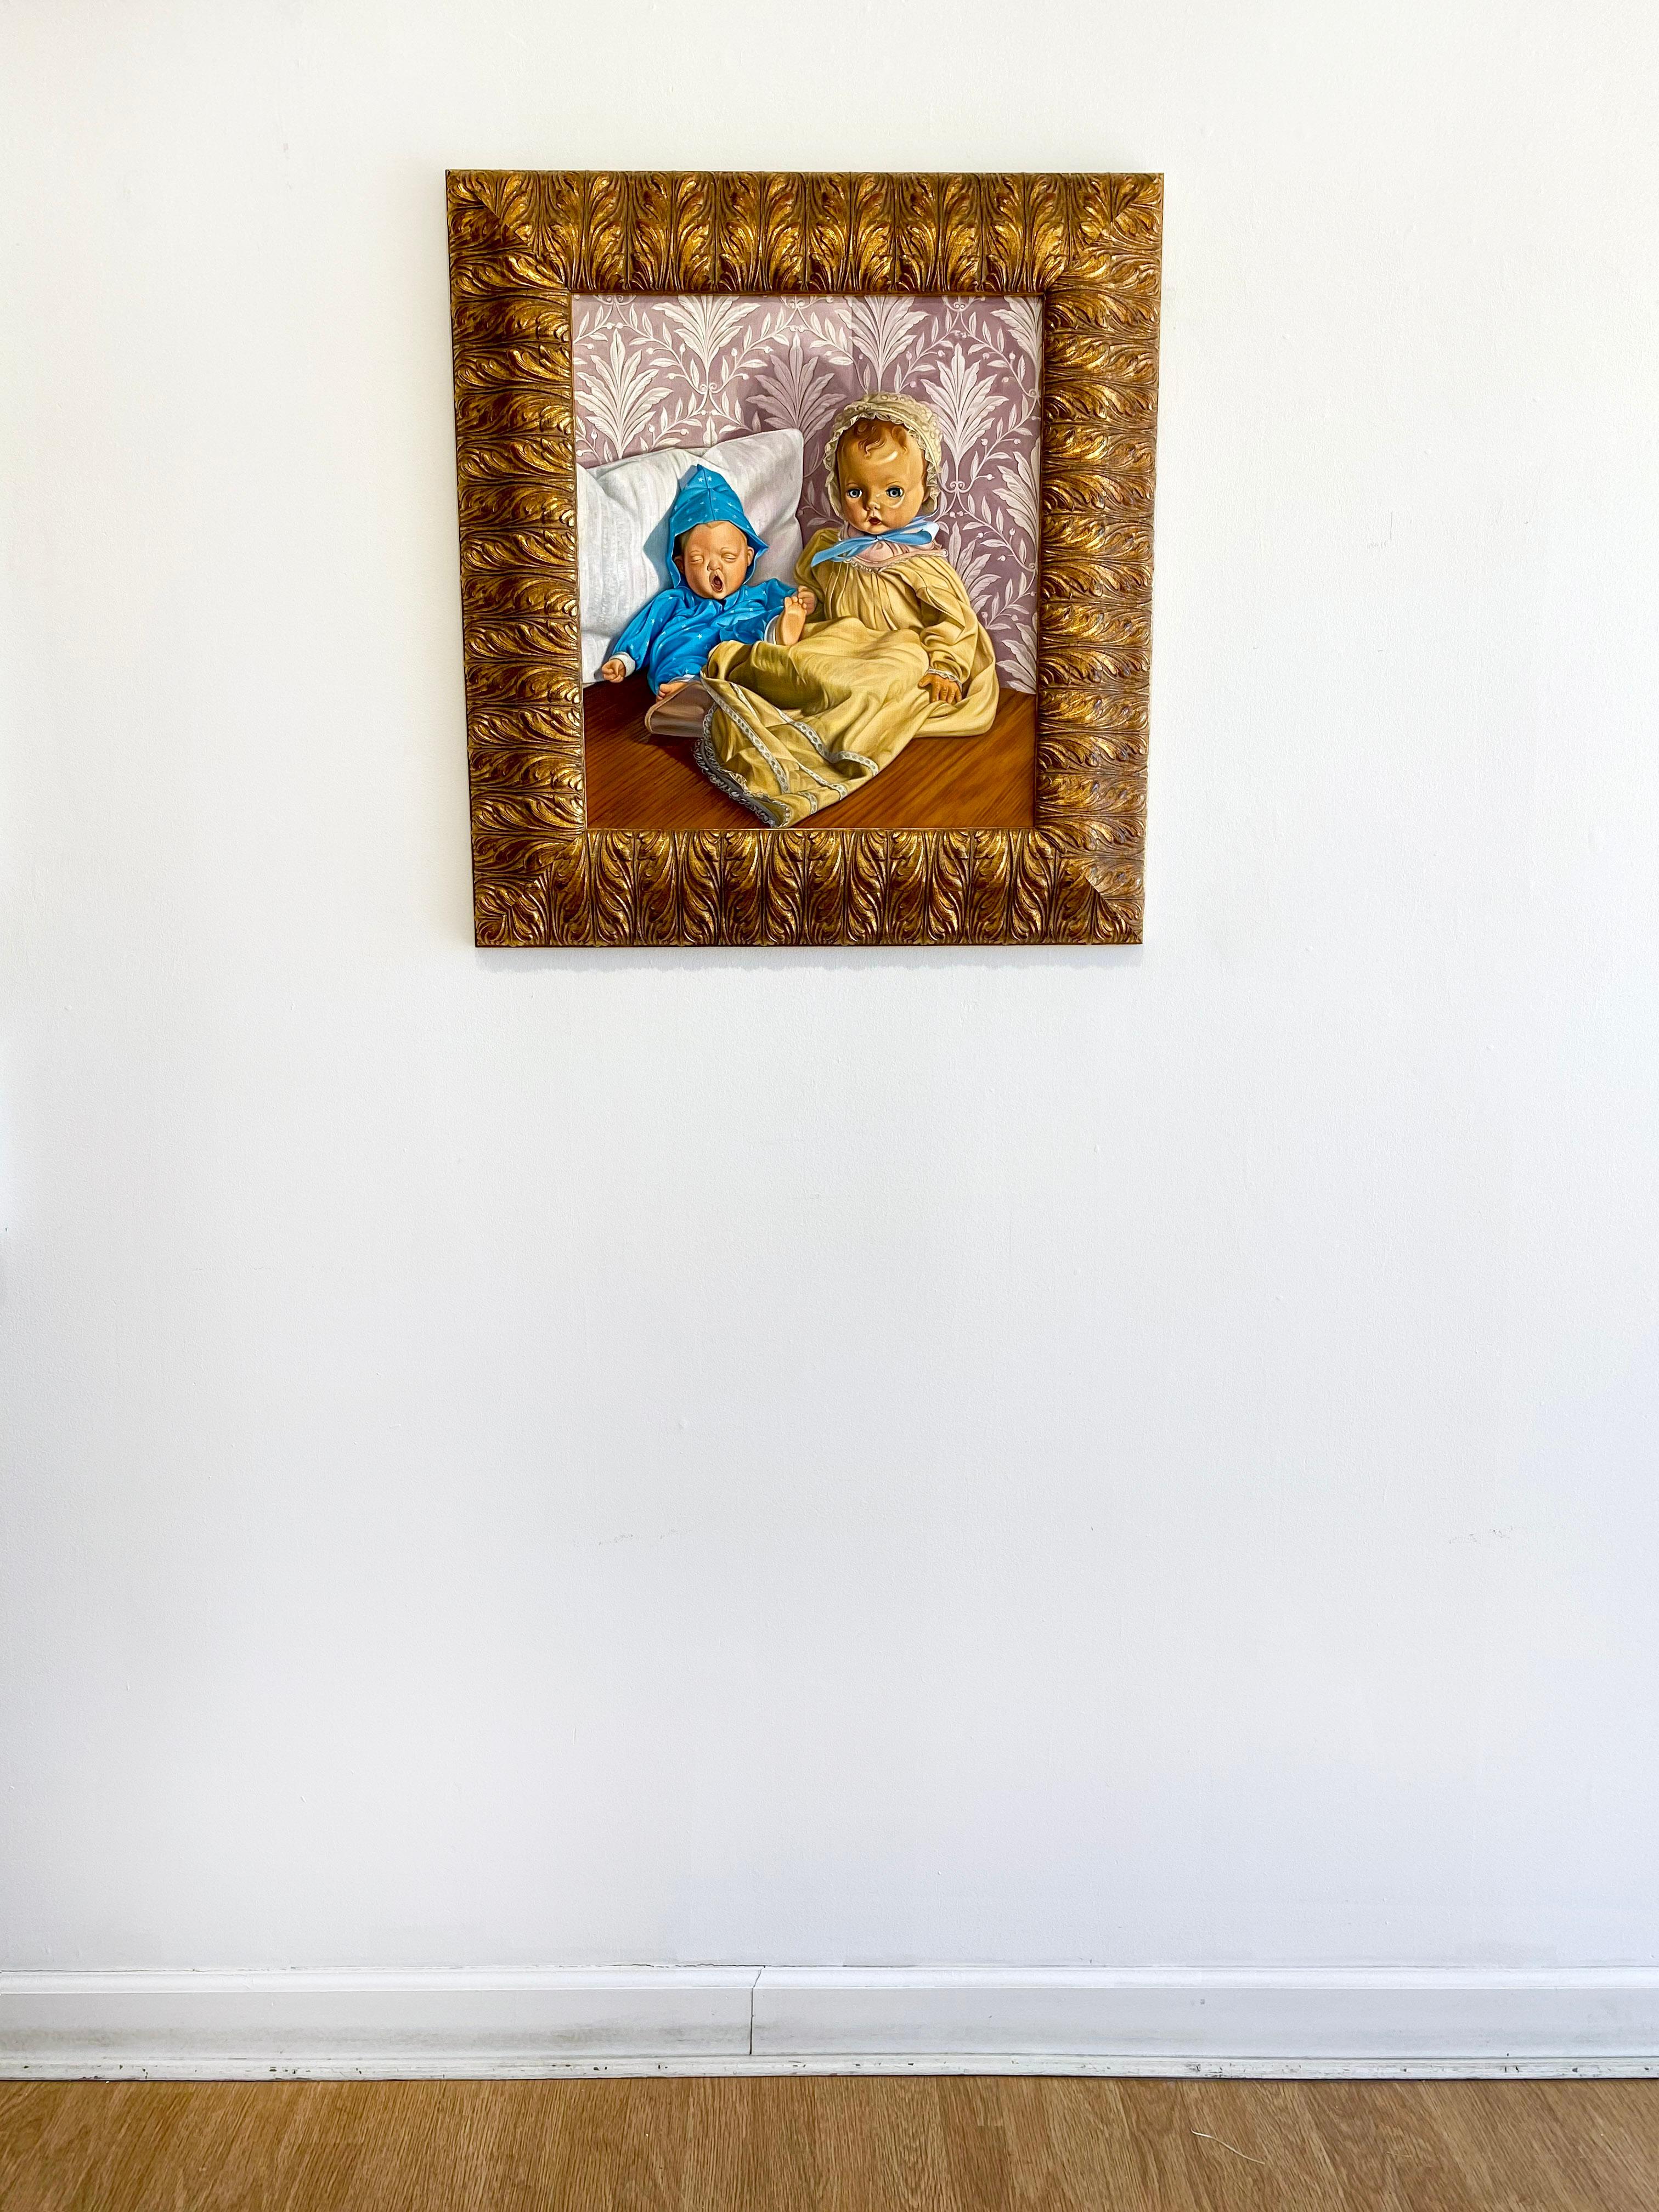 'Sid and Nancy' by American artist Thomas Hoffman, oil on linen, 20 x 18 inches. This photorealistic painting features an antique doll sitting next to a yawning baby against a backdrop of old decorative wallpaper. It is framed in an embellished